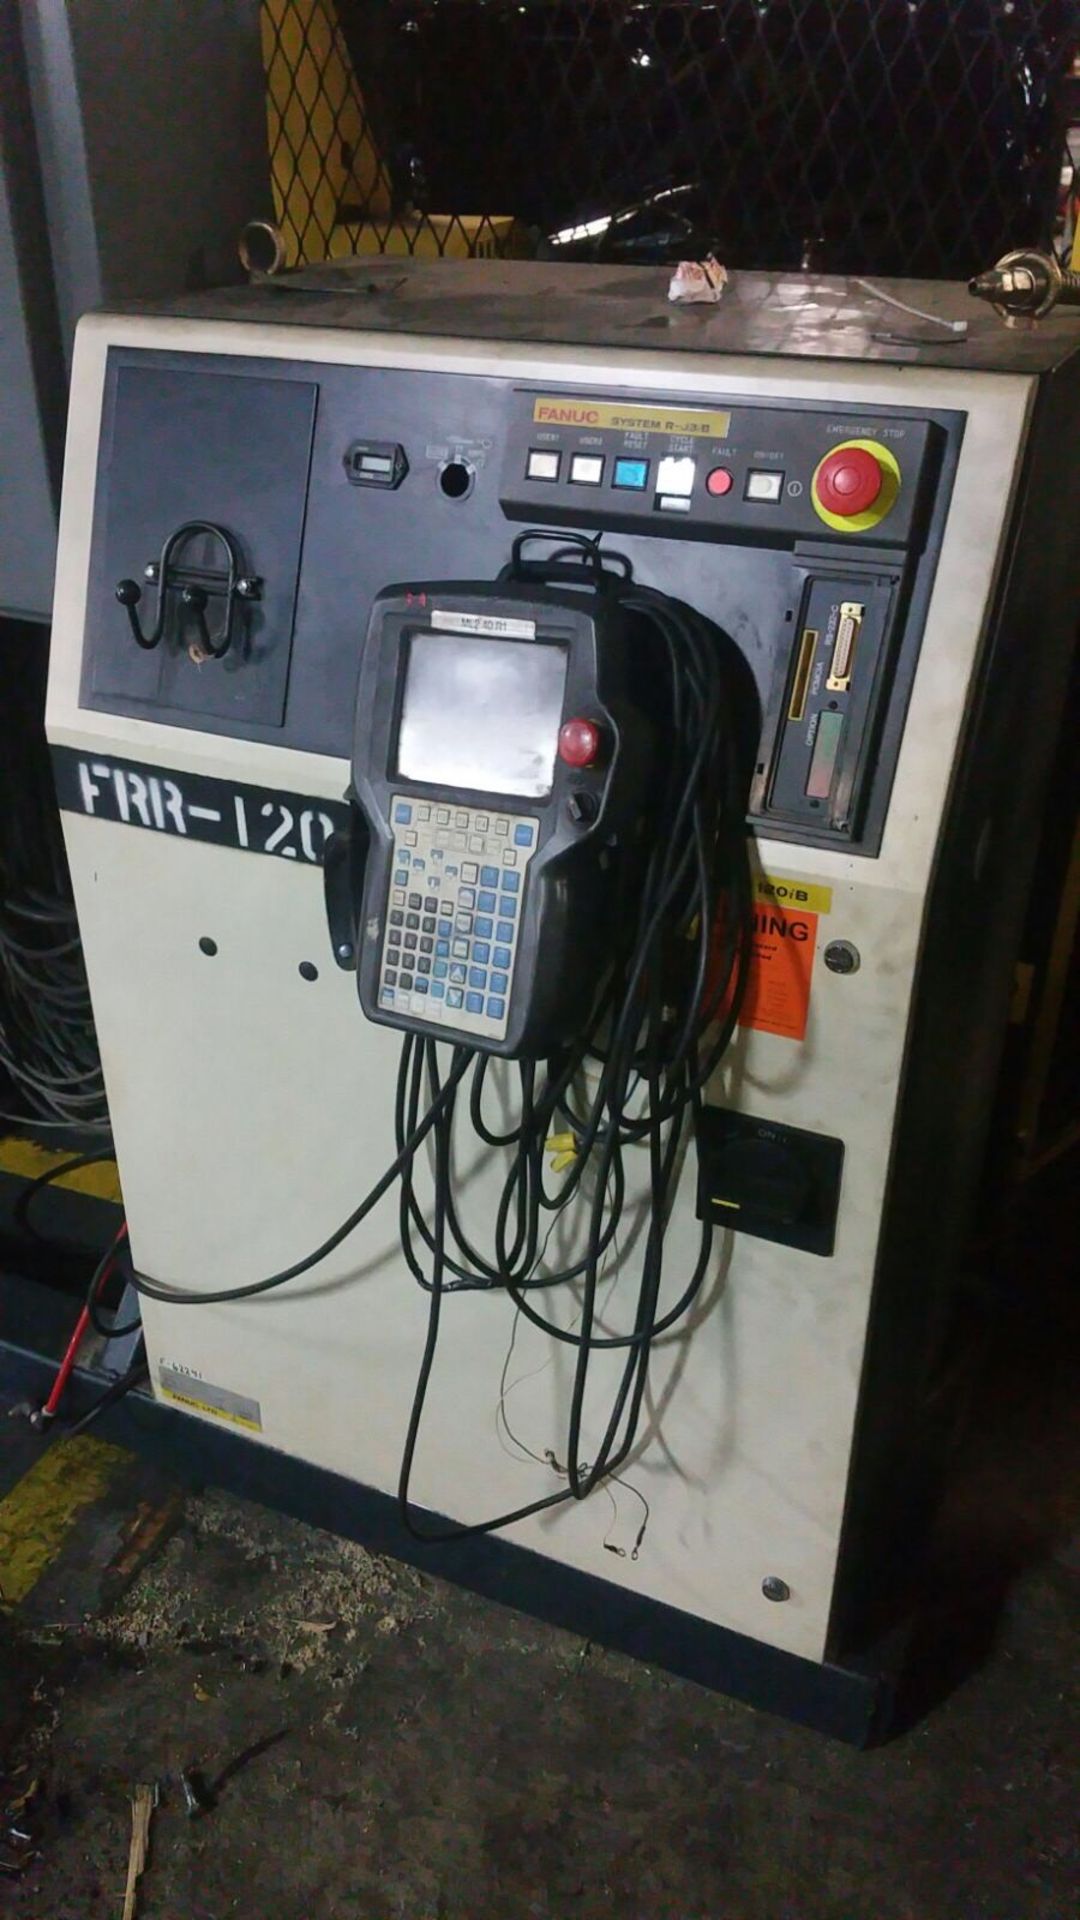 2005 FANUC ARCMATE 120iB W/R-J3iB CONTROLS, CABLES, TEACH PENDANT AND LINCOLN 455M POWER SUPPLY - Image 2 of 4